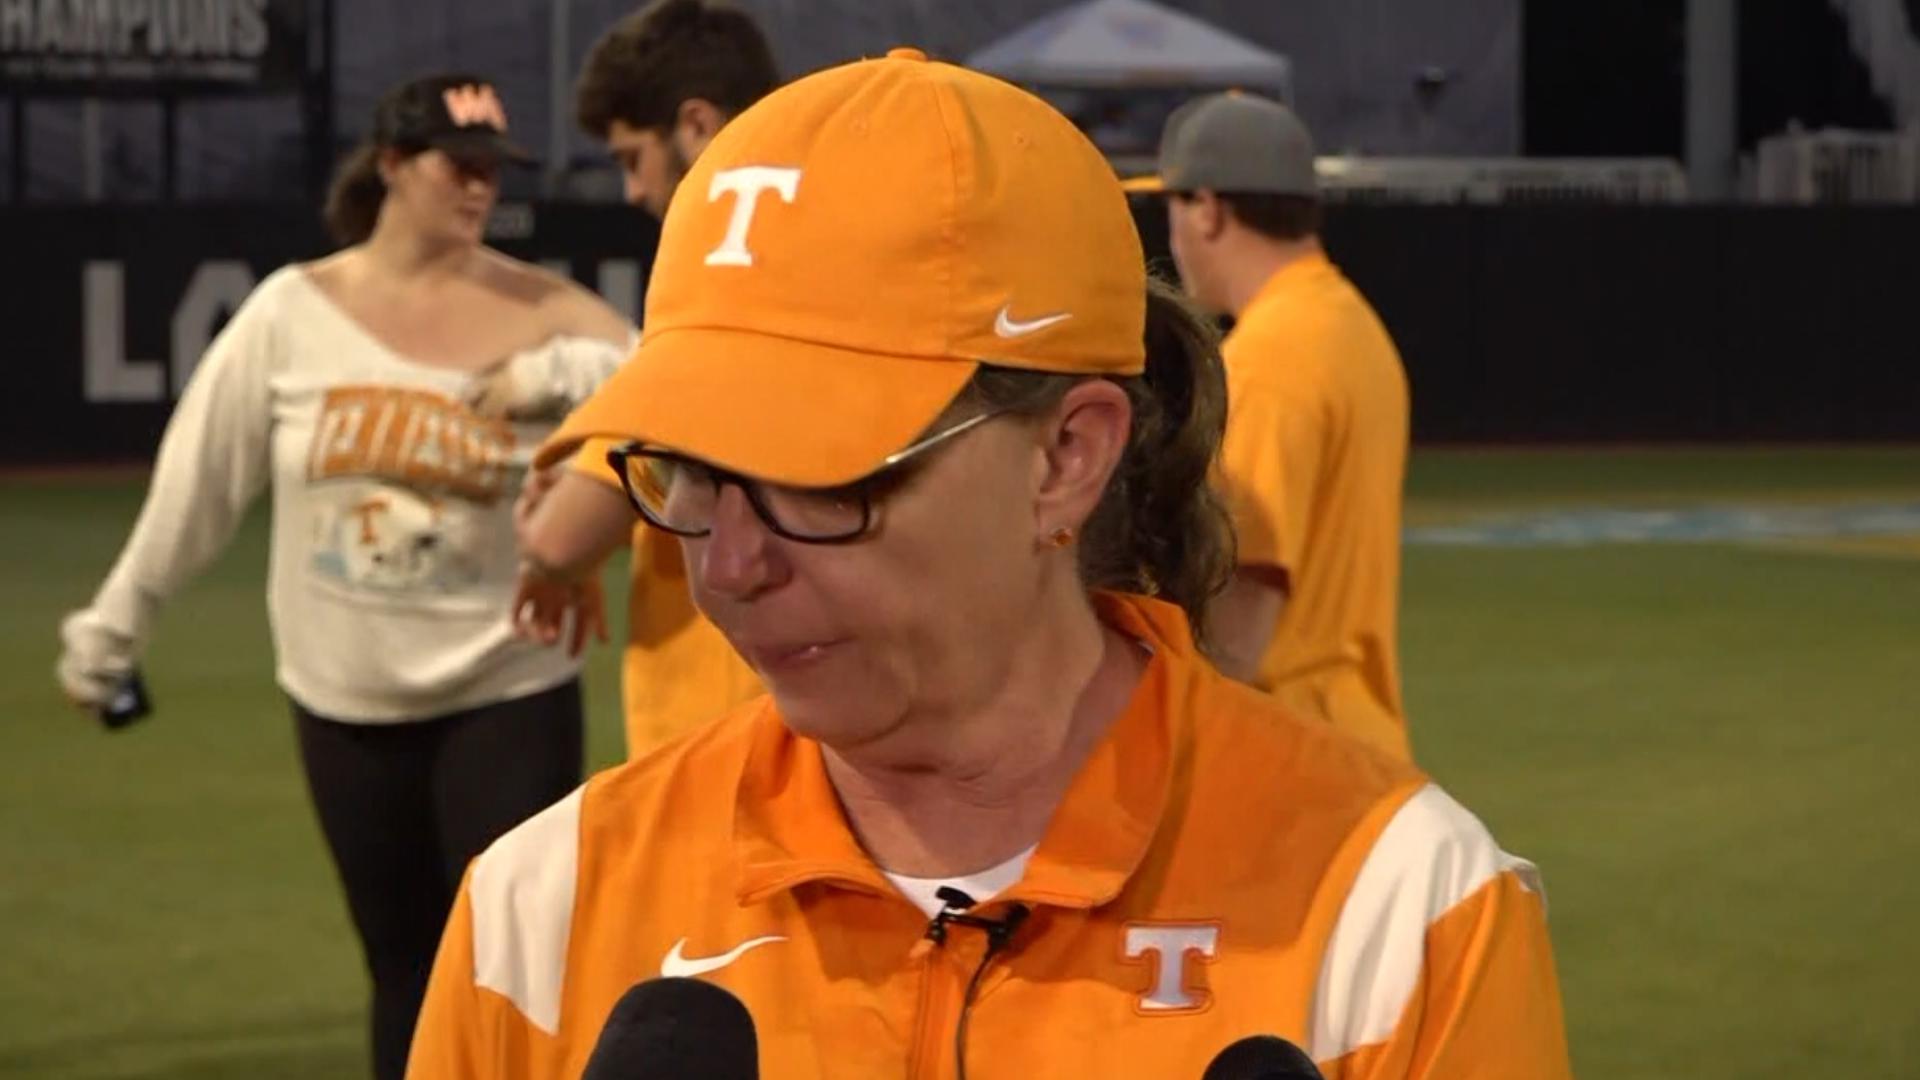 The Lady Vols clinched at least a share of the SEC regular season title with the Game 2 win over Kentucky on Friday night.